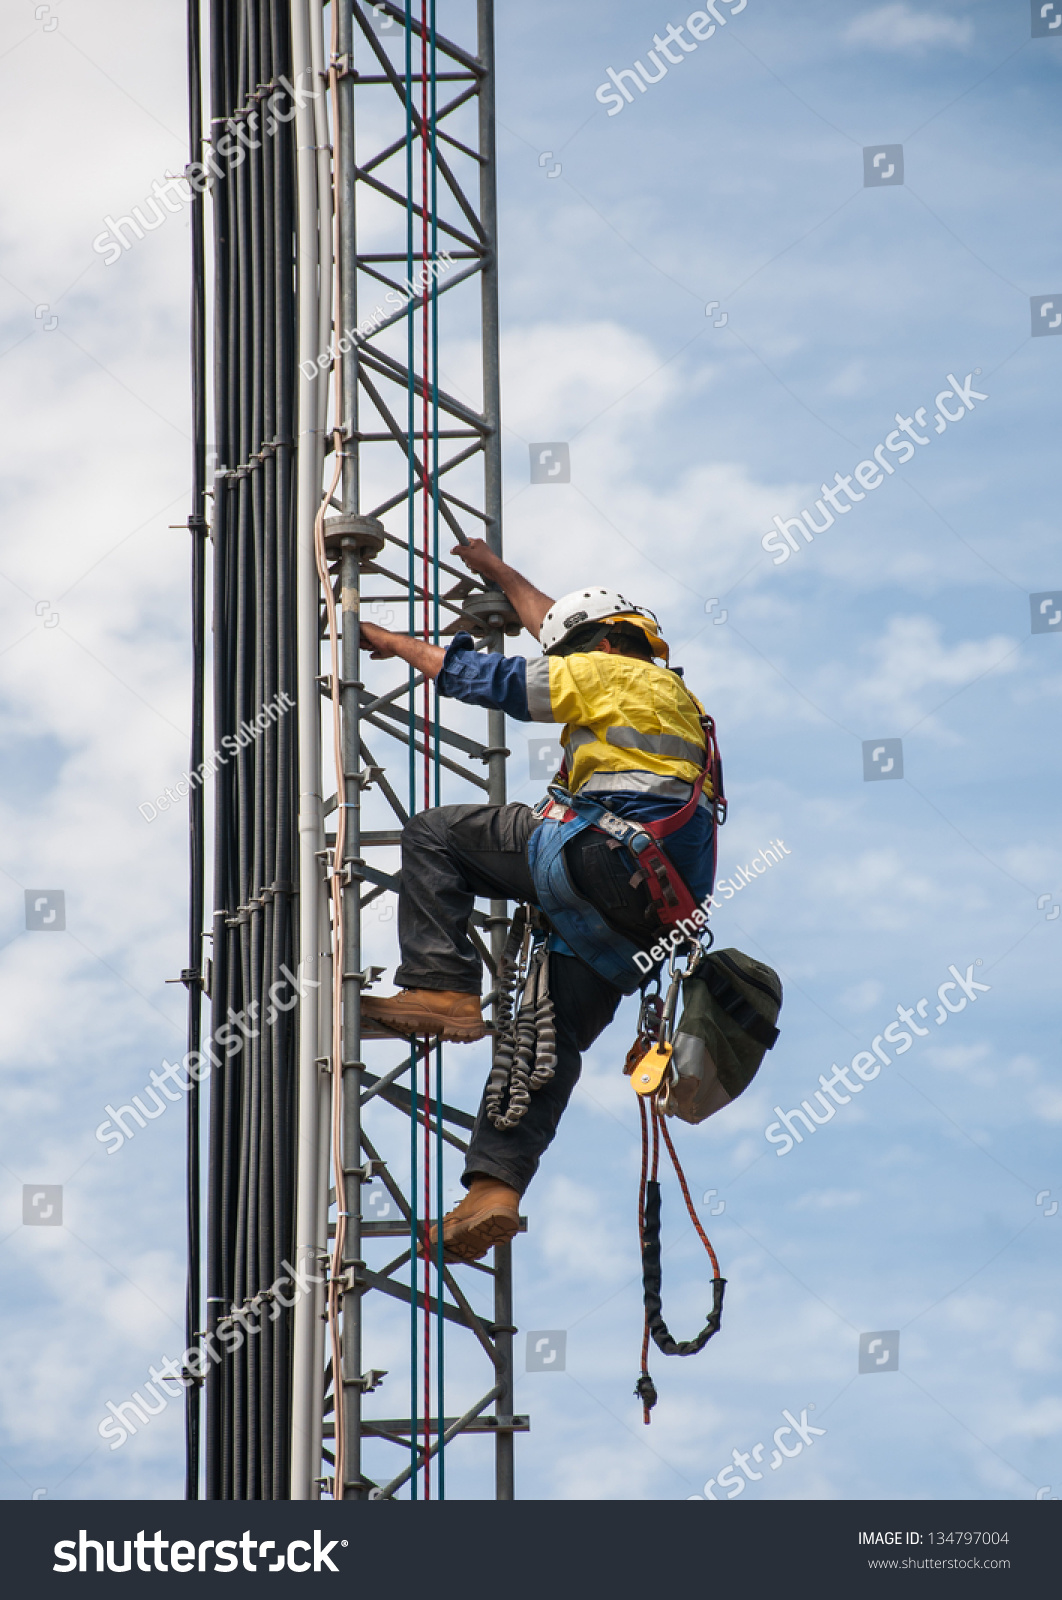 Tower climber the guyed tower cellular system. #134797004